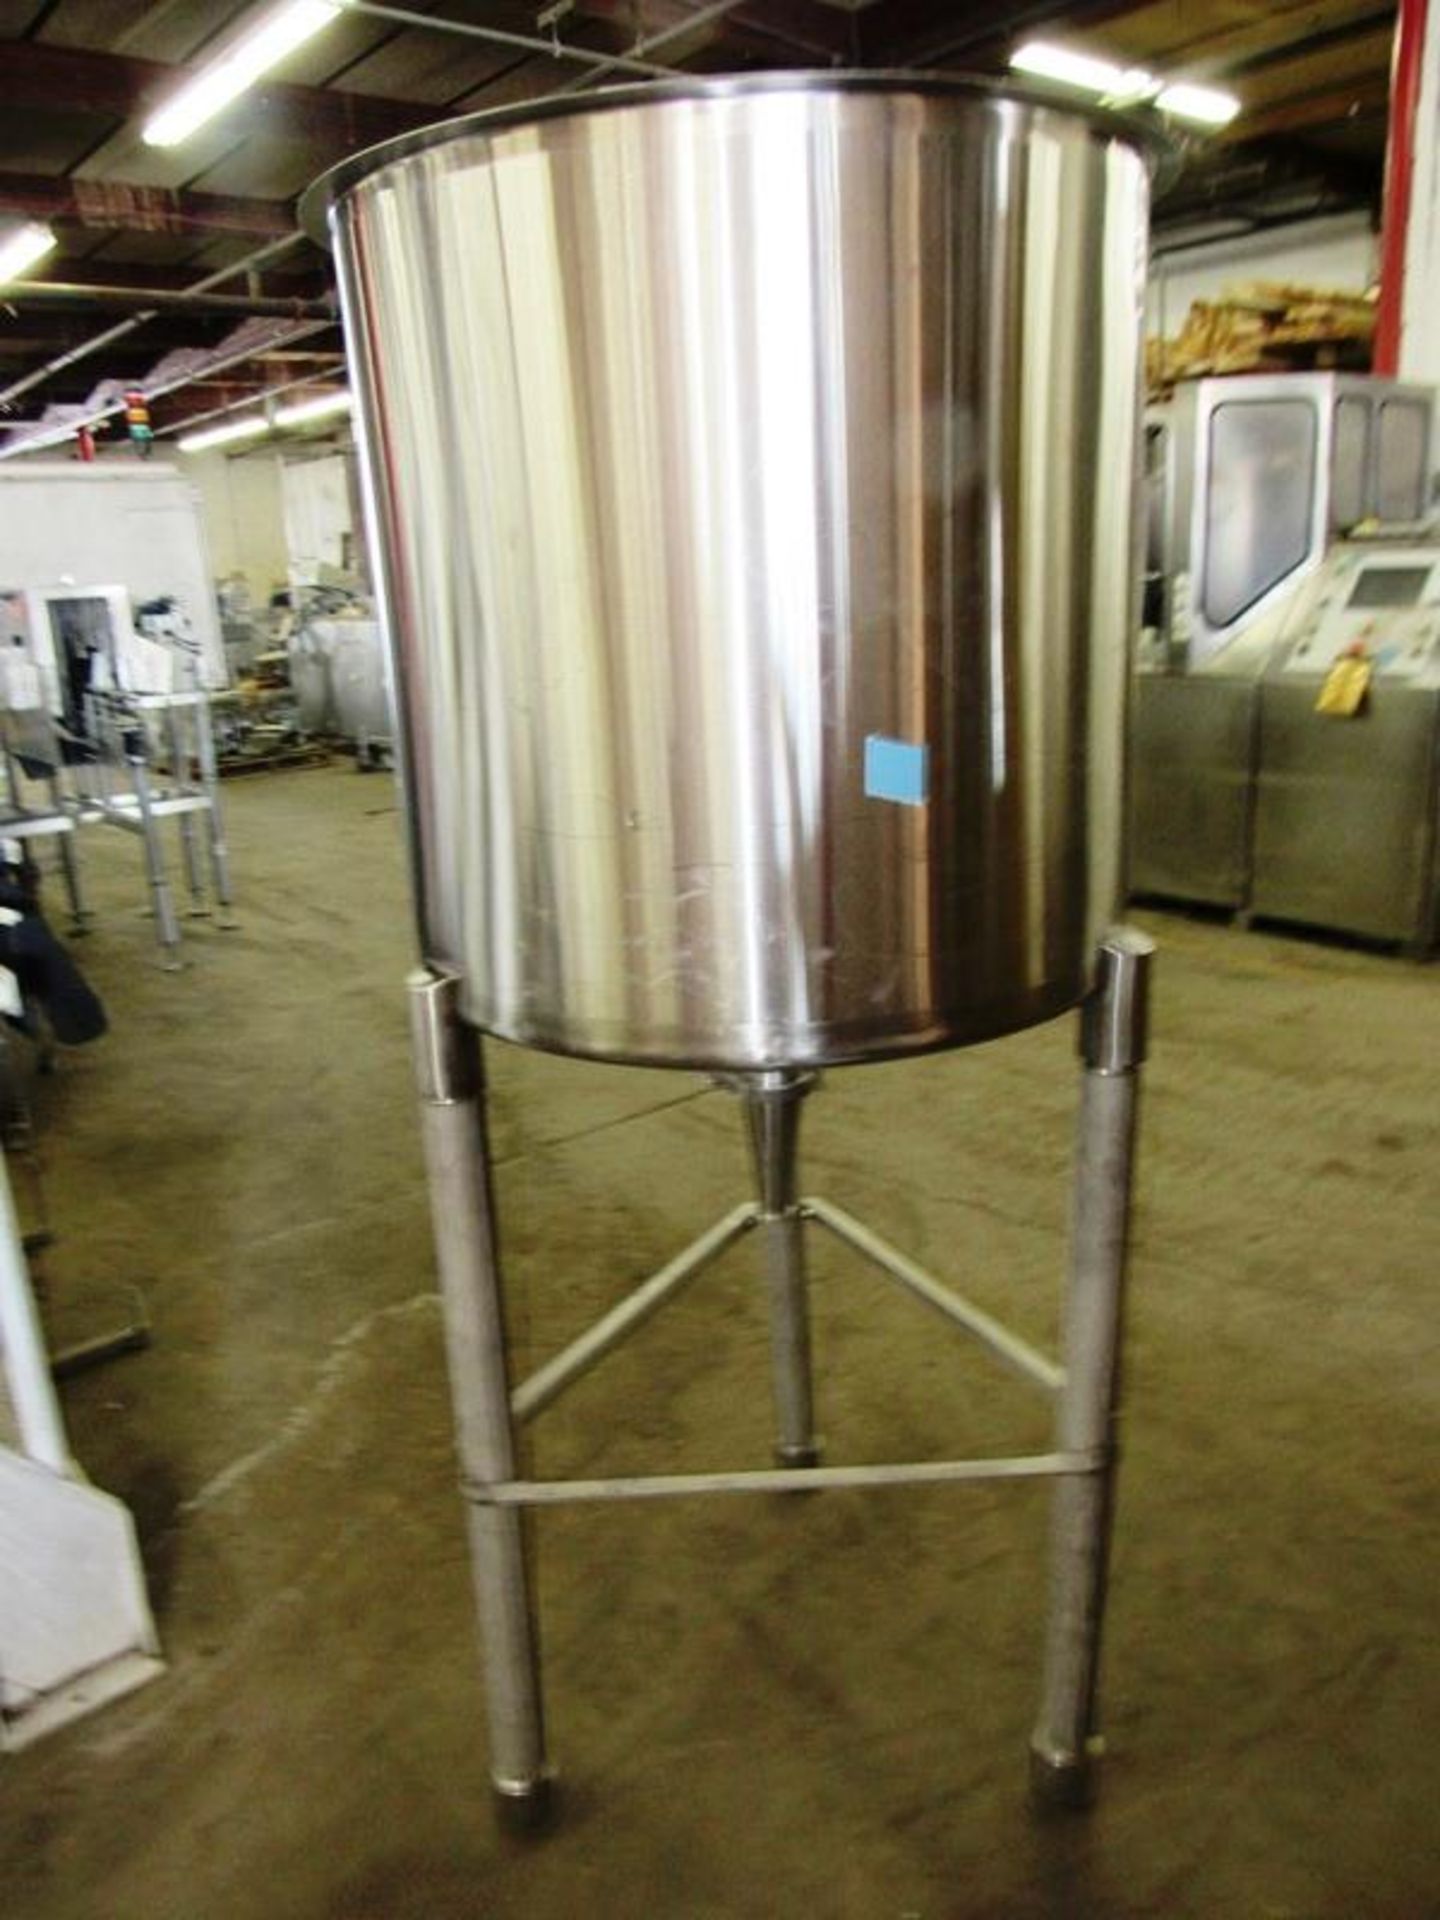 G&F Mfg. Mdl. TKD-80G Stainless Steel Single Wall Tank, 30" Dia. X 6' Tall overall, 1" bottom - Image 2 of 3